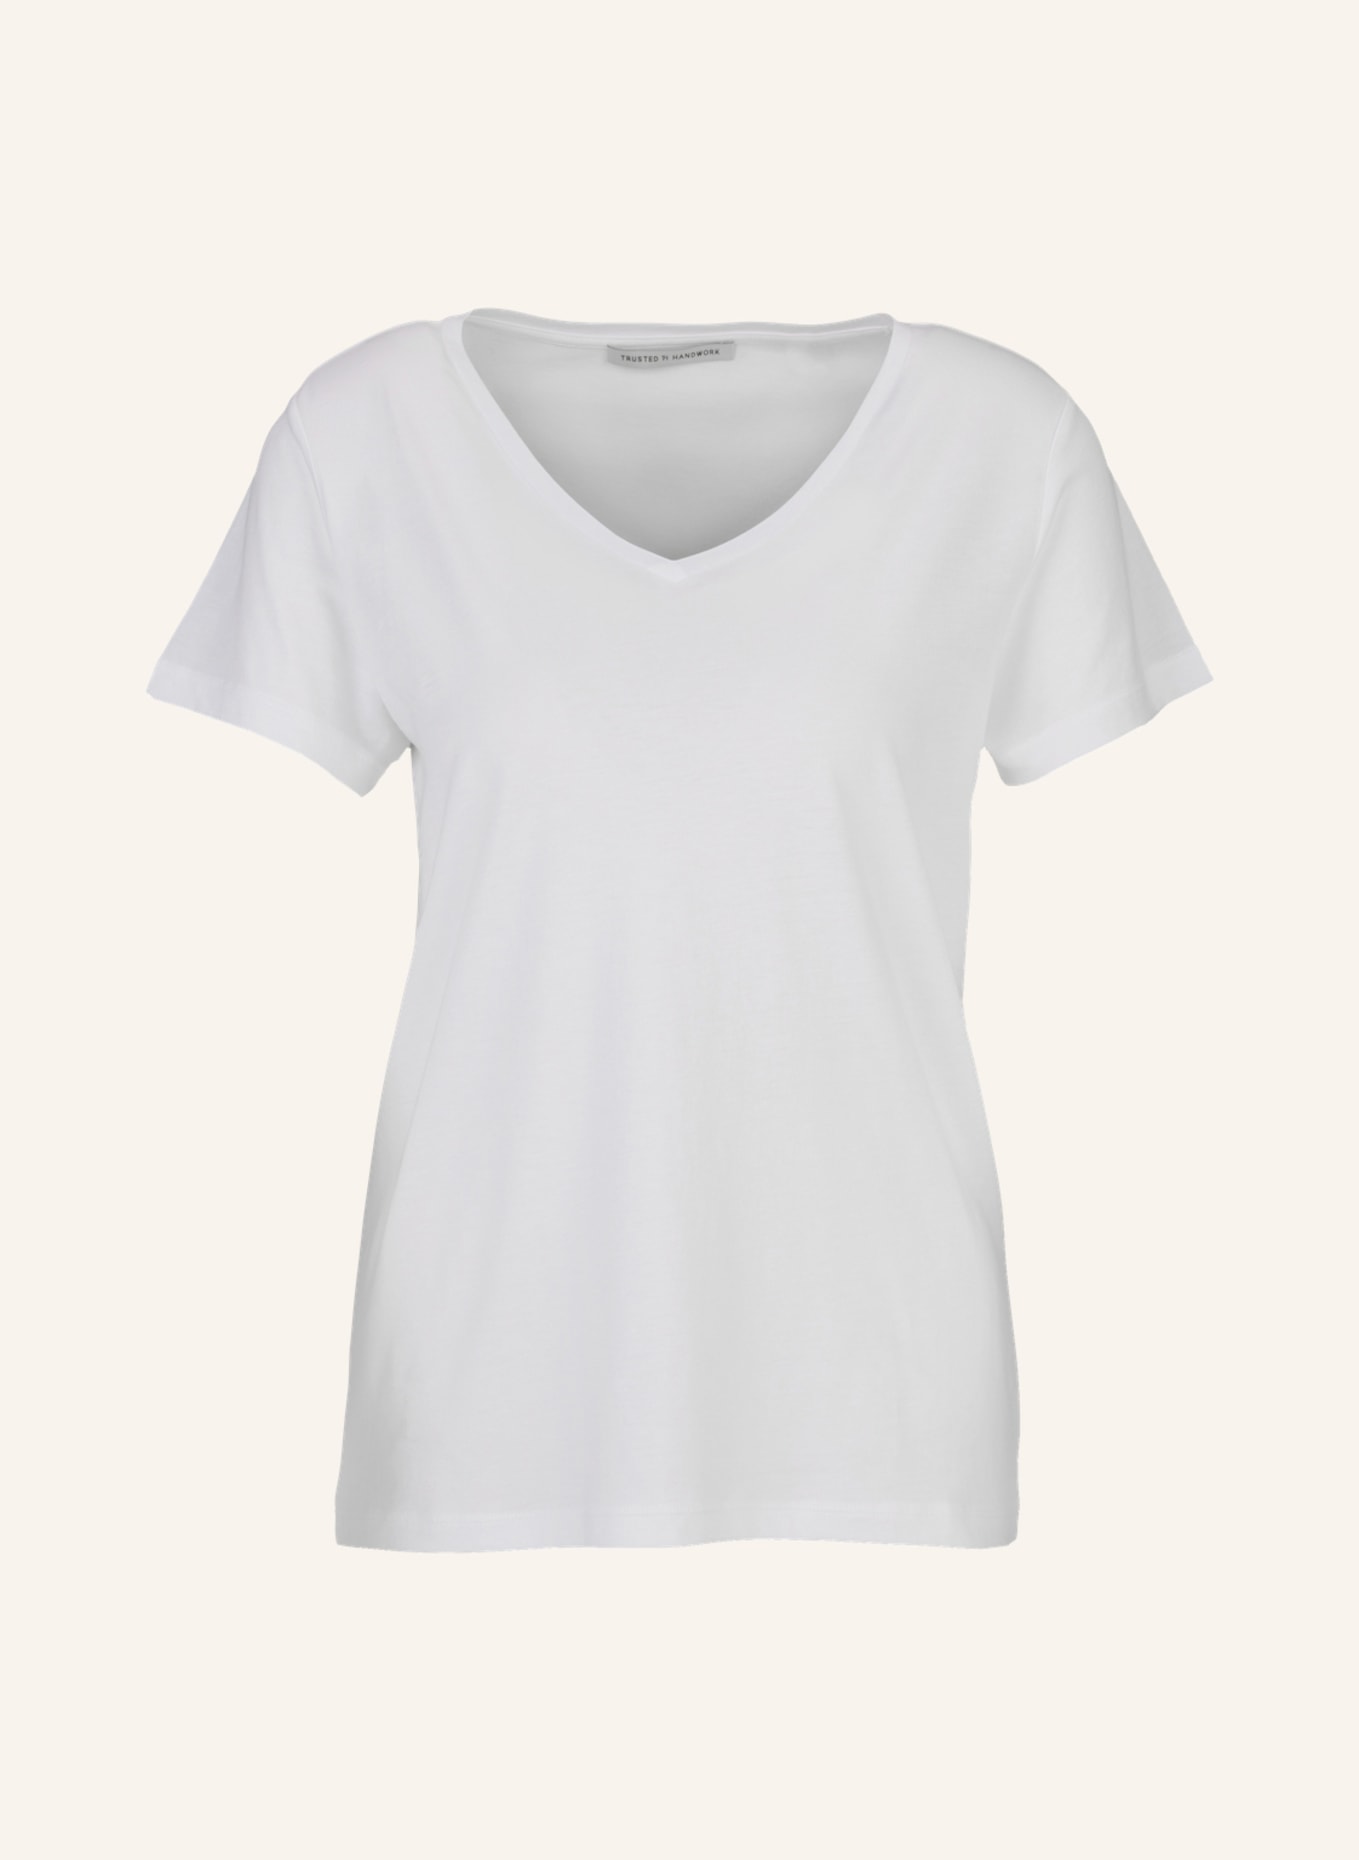 TRUSTED HANDWORK T-Shirt TOULOUSE, Farbe: WEISS (Bild 1)